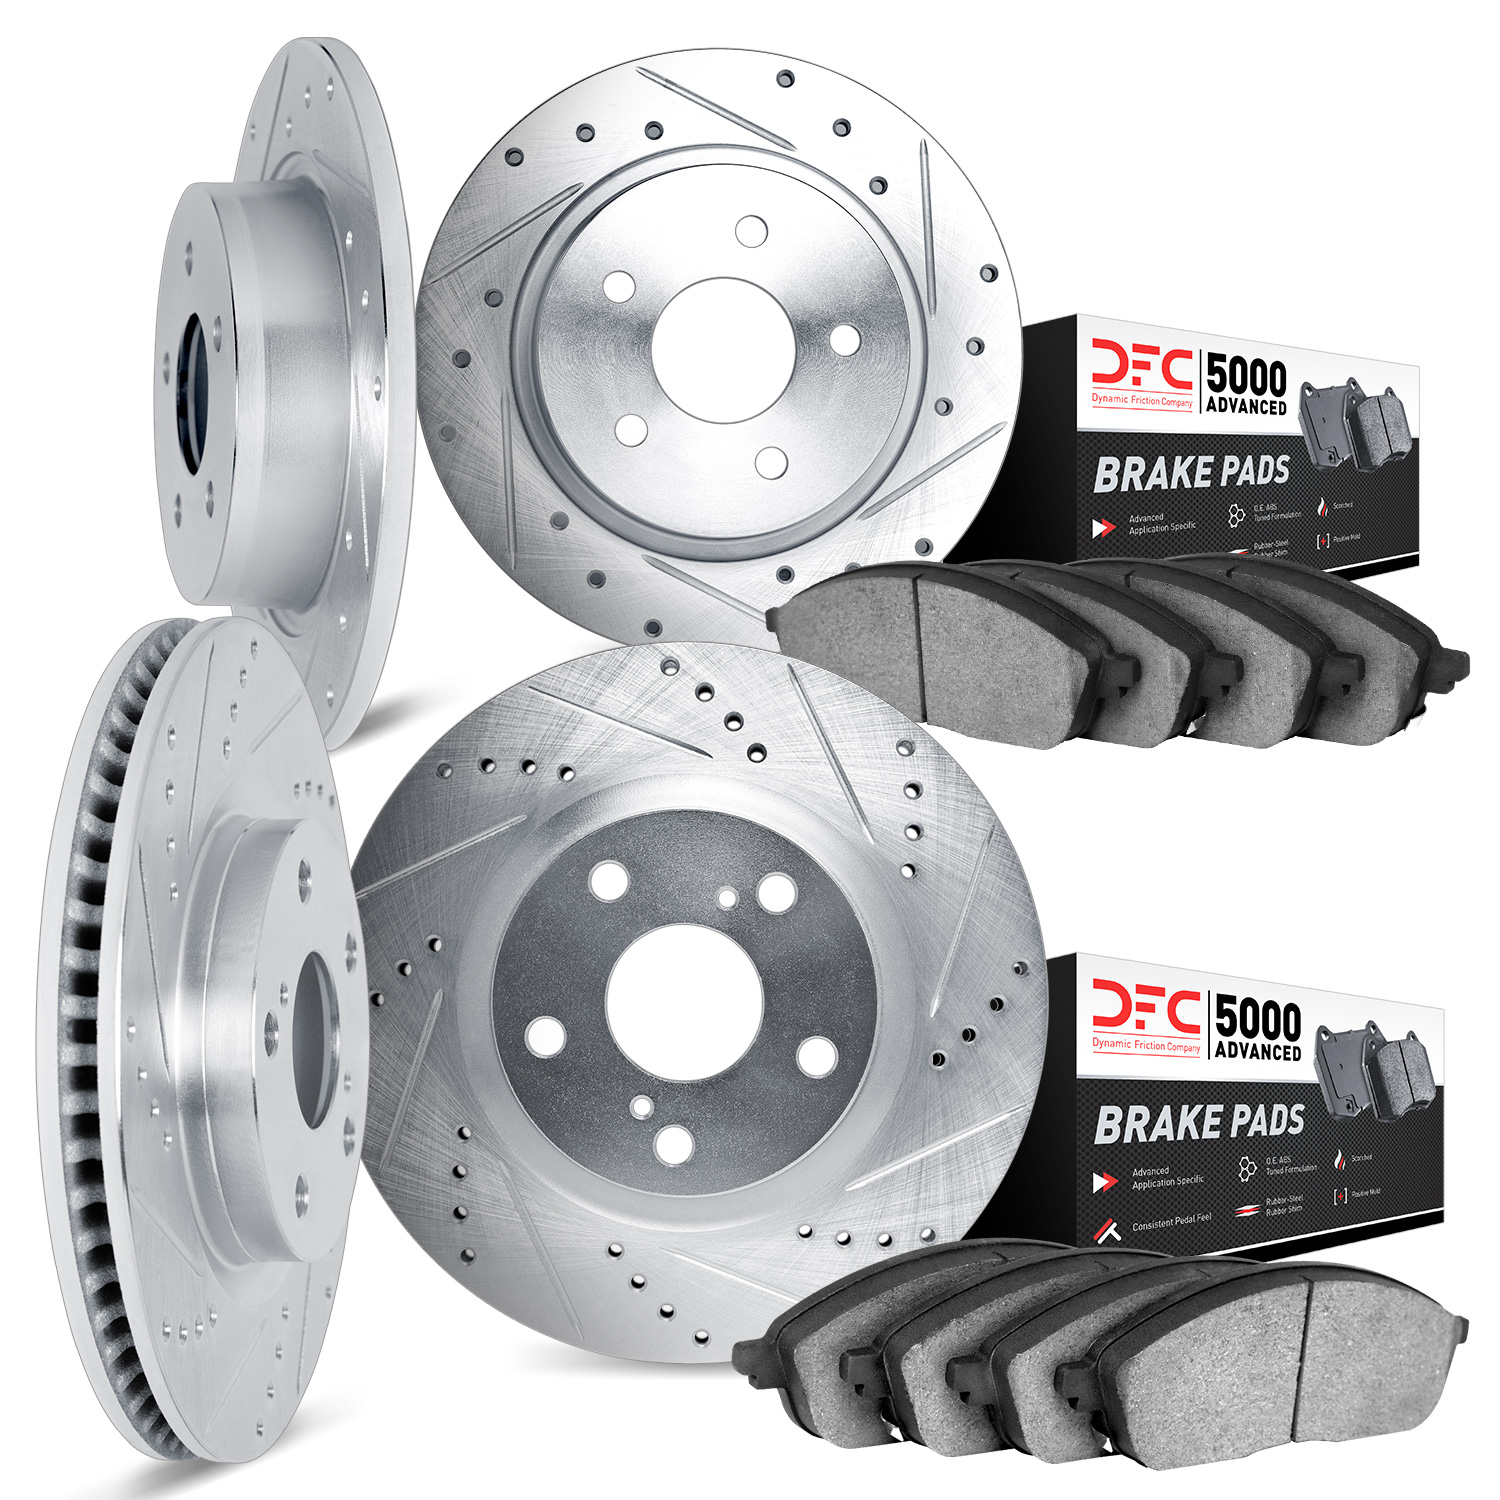 7504-76141 Drilled/Slotted Brake Rotors w/5000 Advanced Brake Pads Kit [Silver], 2004-2004 Lexus/Toyota/Scion, Position: Front a